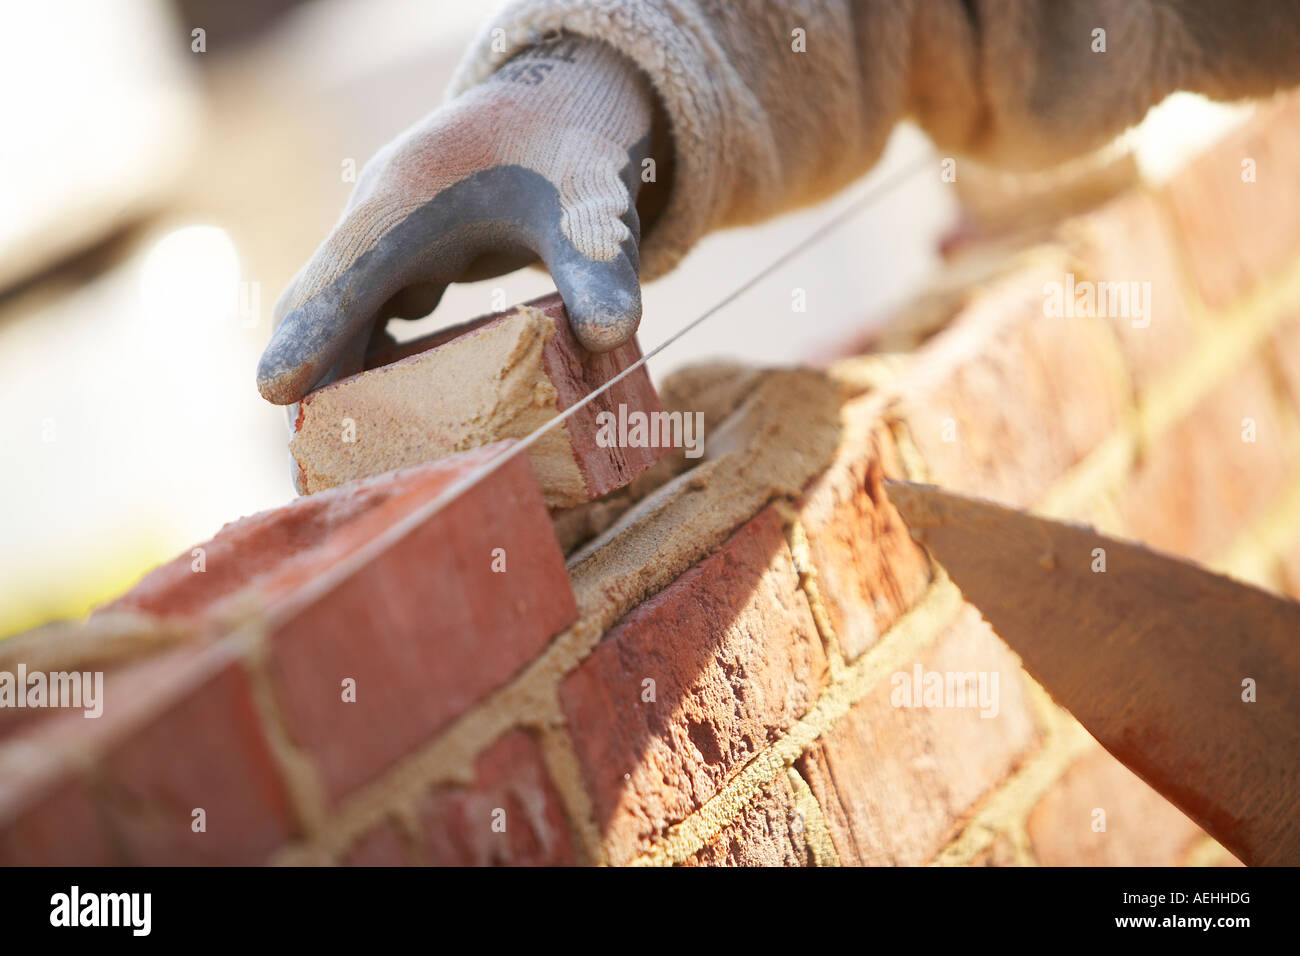 WORKERS HANDS WITH TROWEL LAYING BRICKS WITH MORTER ON A CONSTRUCTION SITE IN THE UK, BUILDING Stock Photo